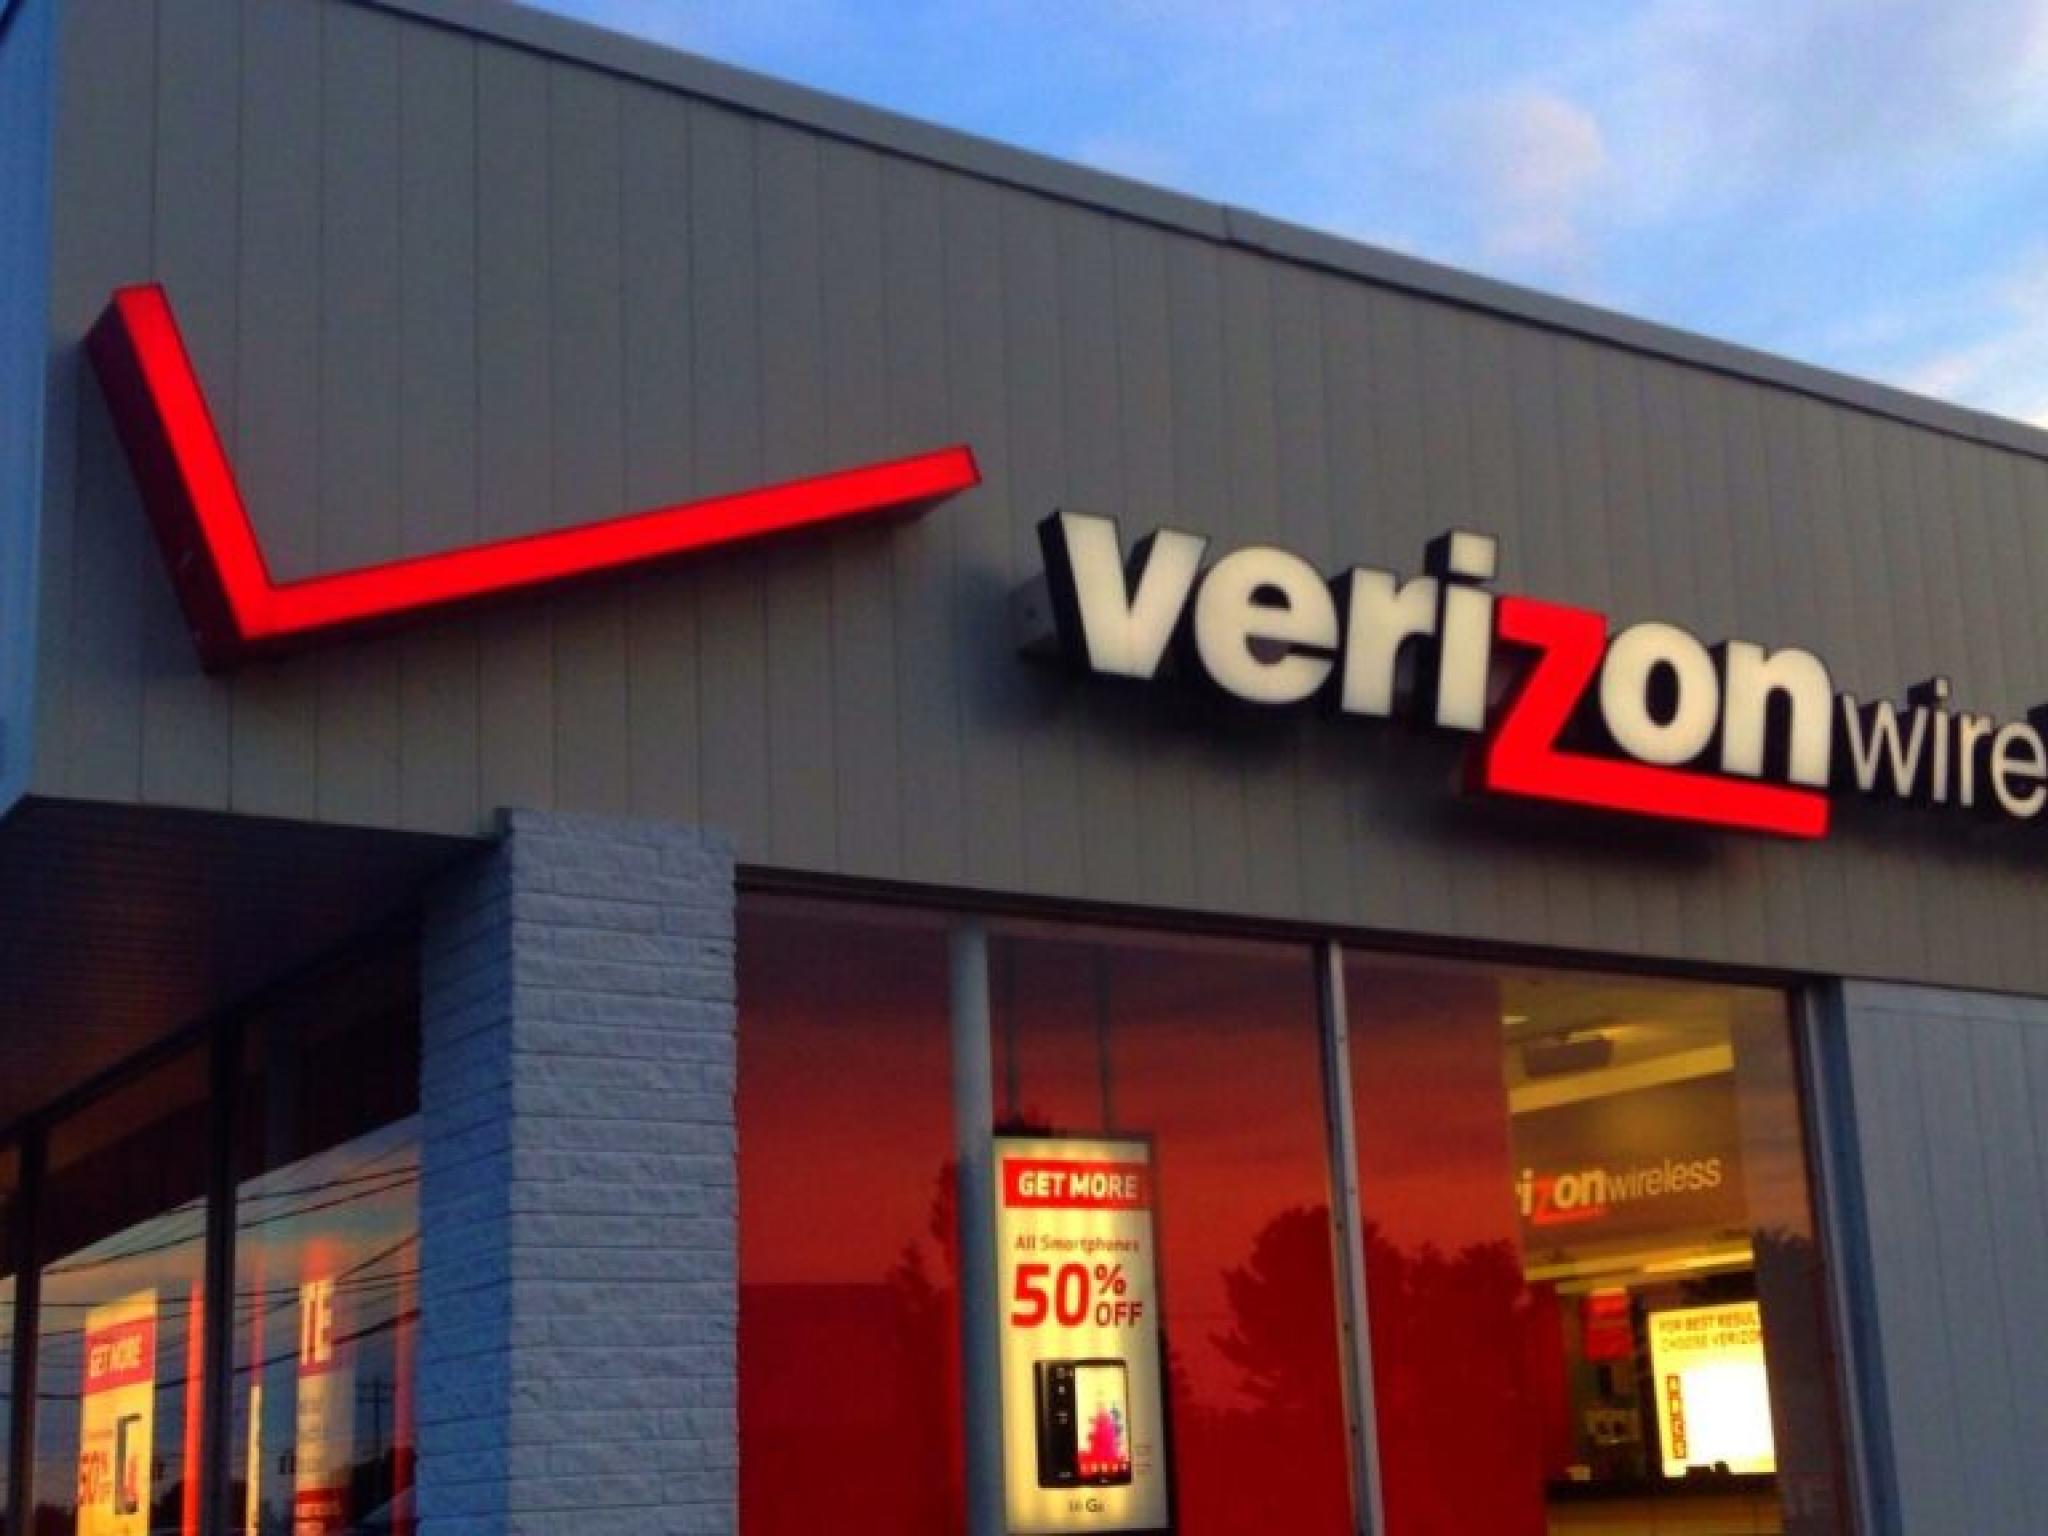  verizon-postpaid-net-adds-decline-but-broadband-growth-is-close-to-the-best-analyst 